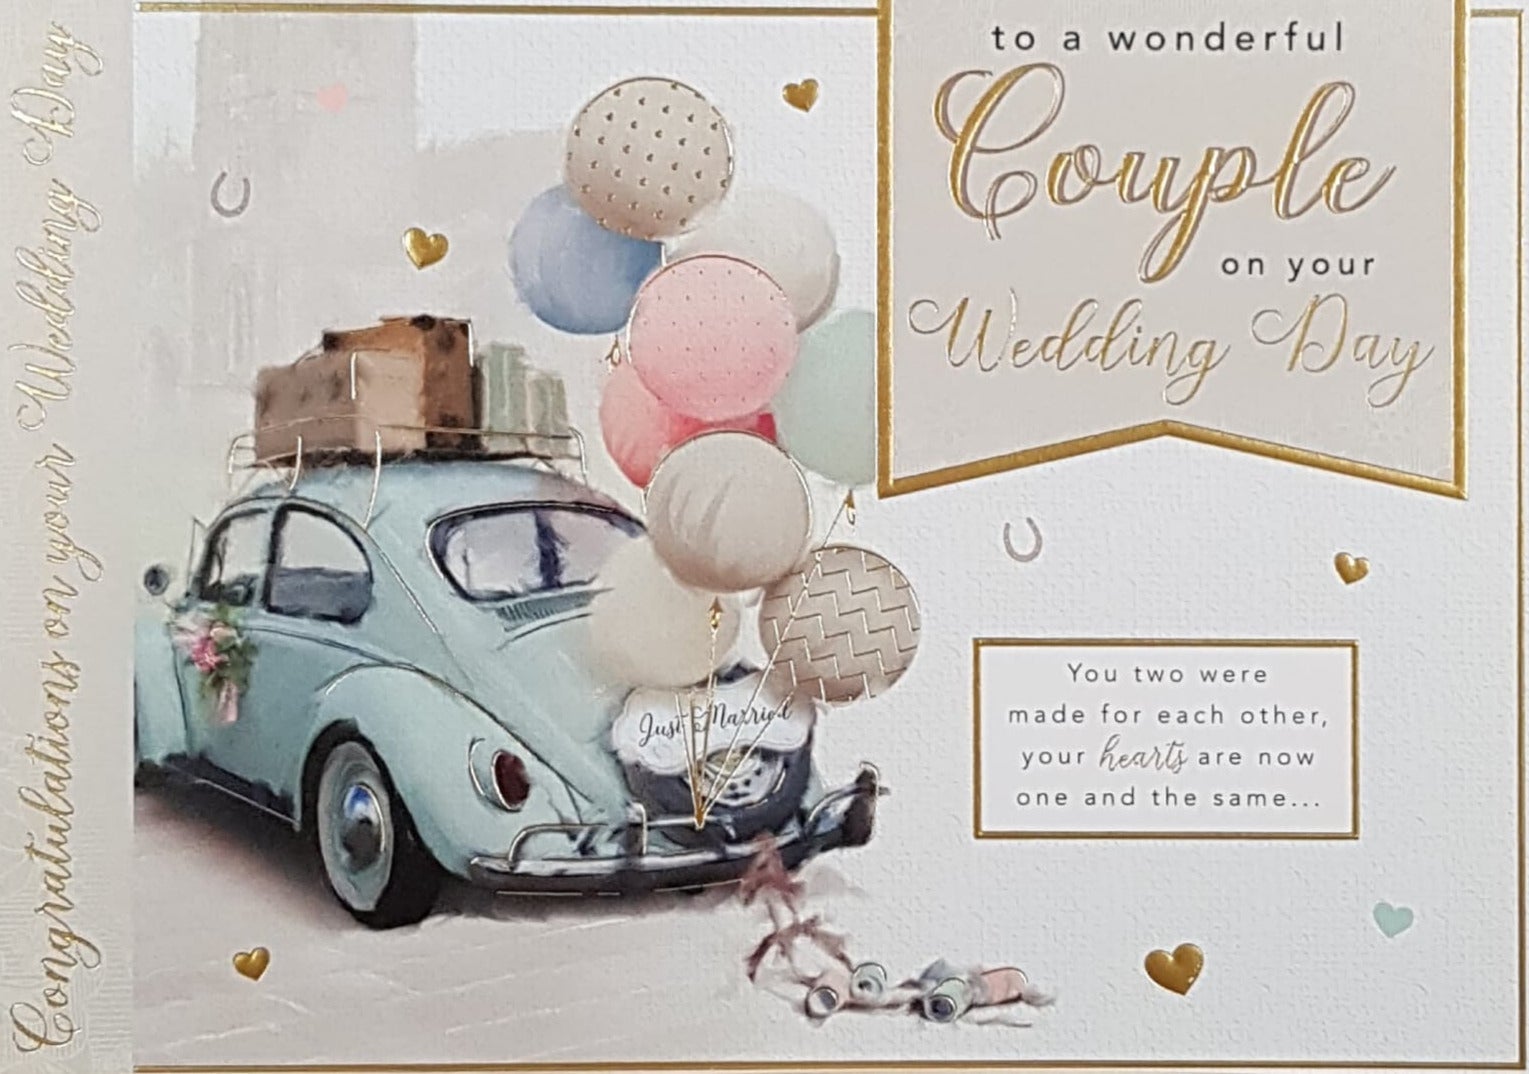 Wedding Card - Wonderful Couple / A Car Carrying A Luggage & Balloons